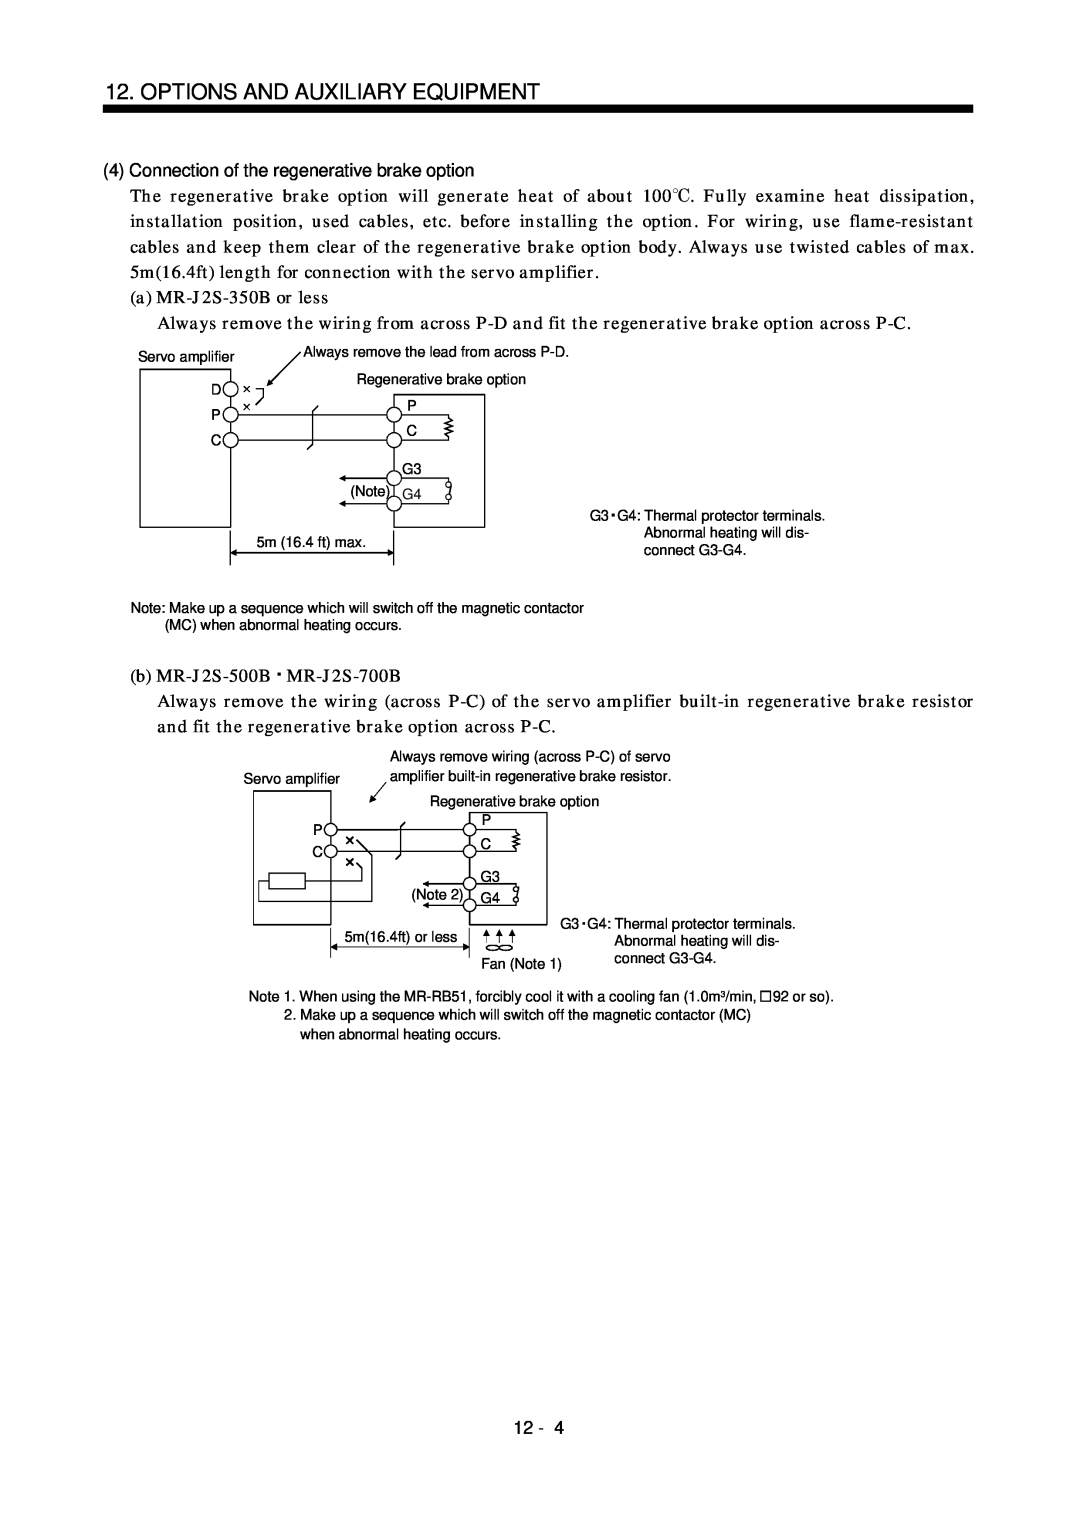 Bose MR-J2S- B instruction manual 4Connection of the regenerative brake option, Options And Auxiliary Equipment, 12 